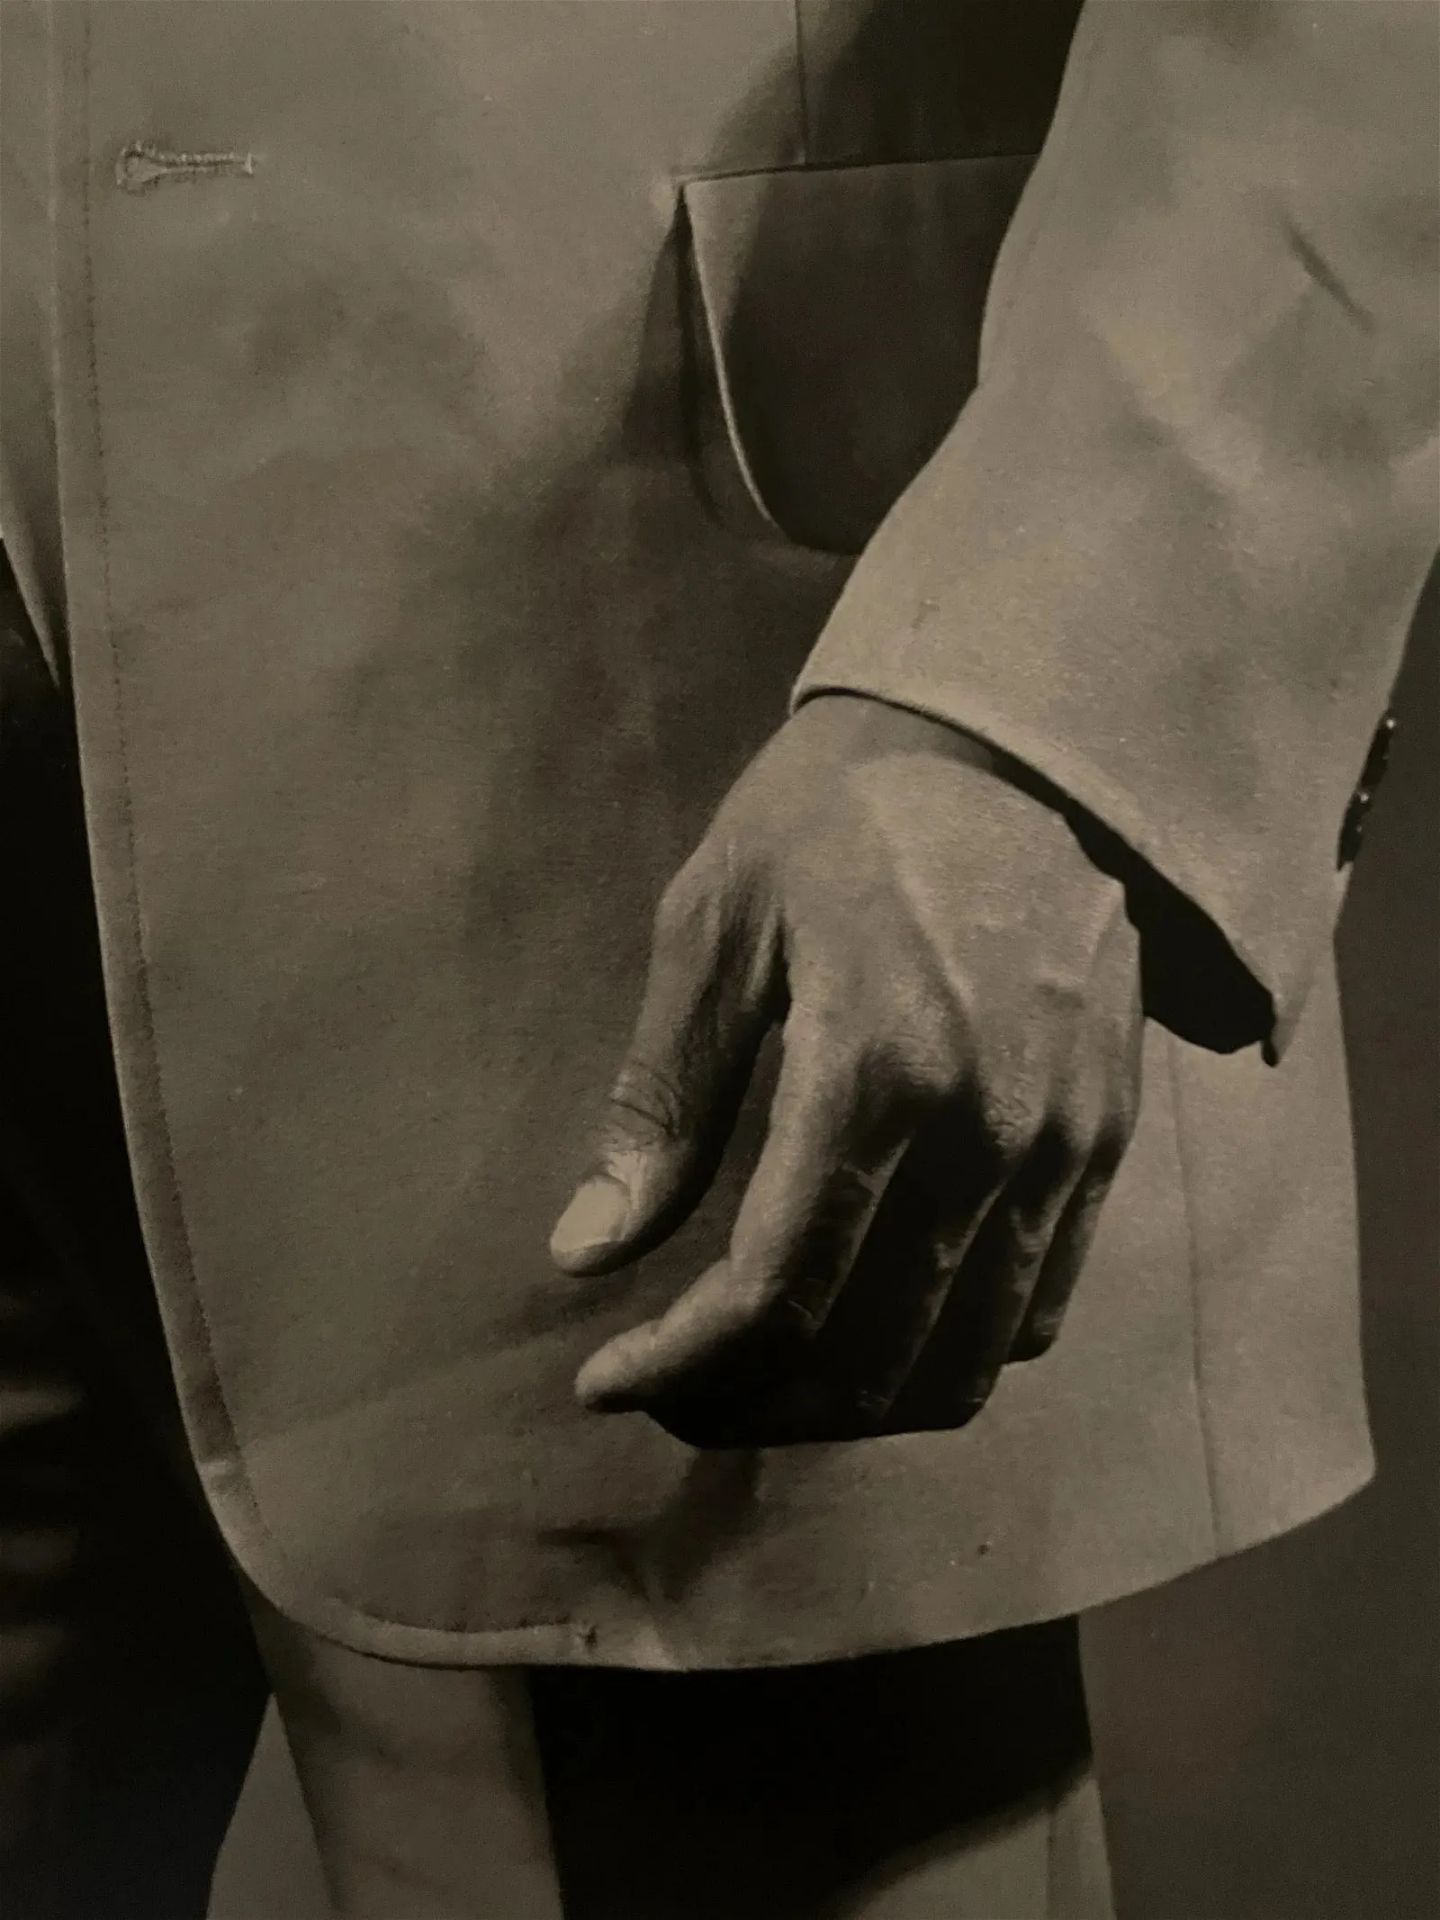 Robert Mapplethorpe "Man in Polyester Suit, 1980s" Print - Image 3 of 5